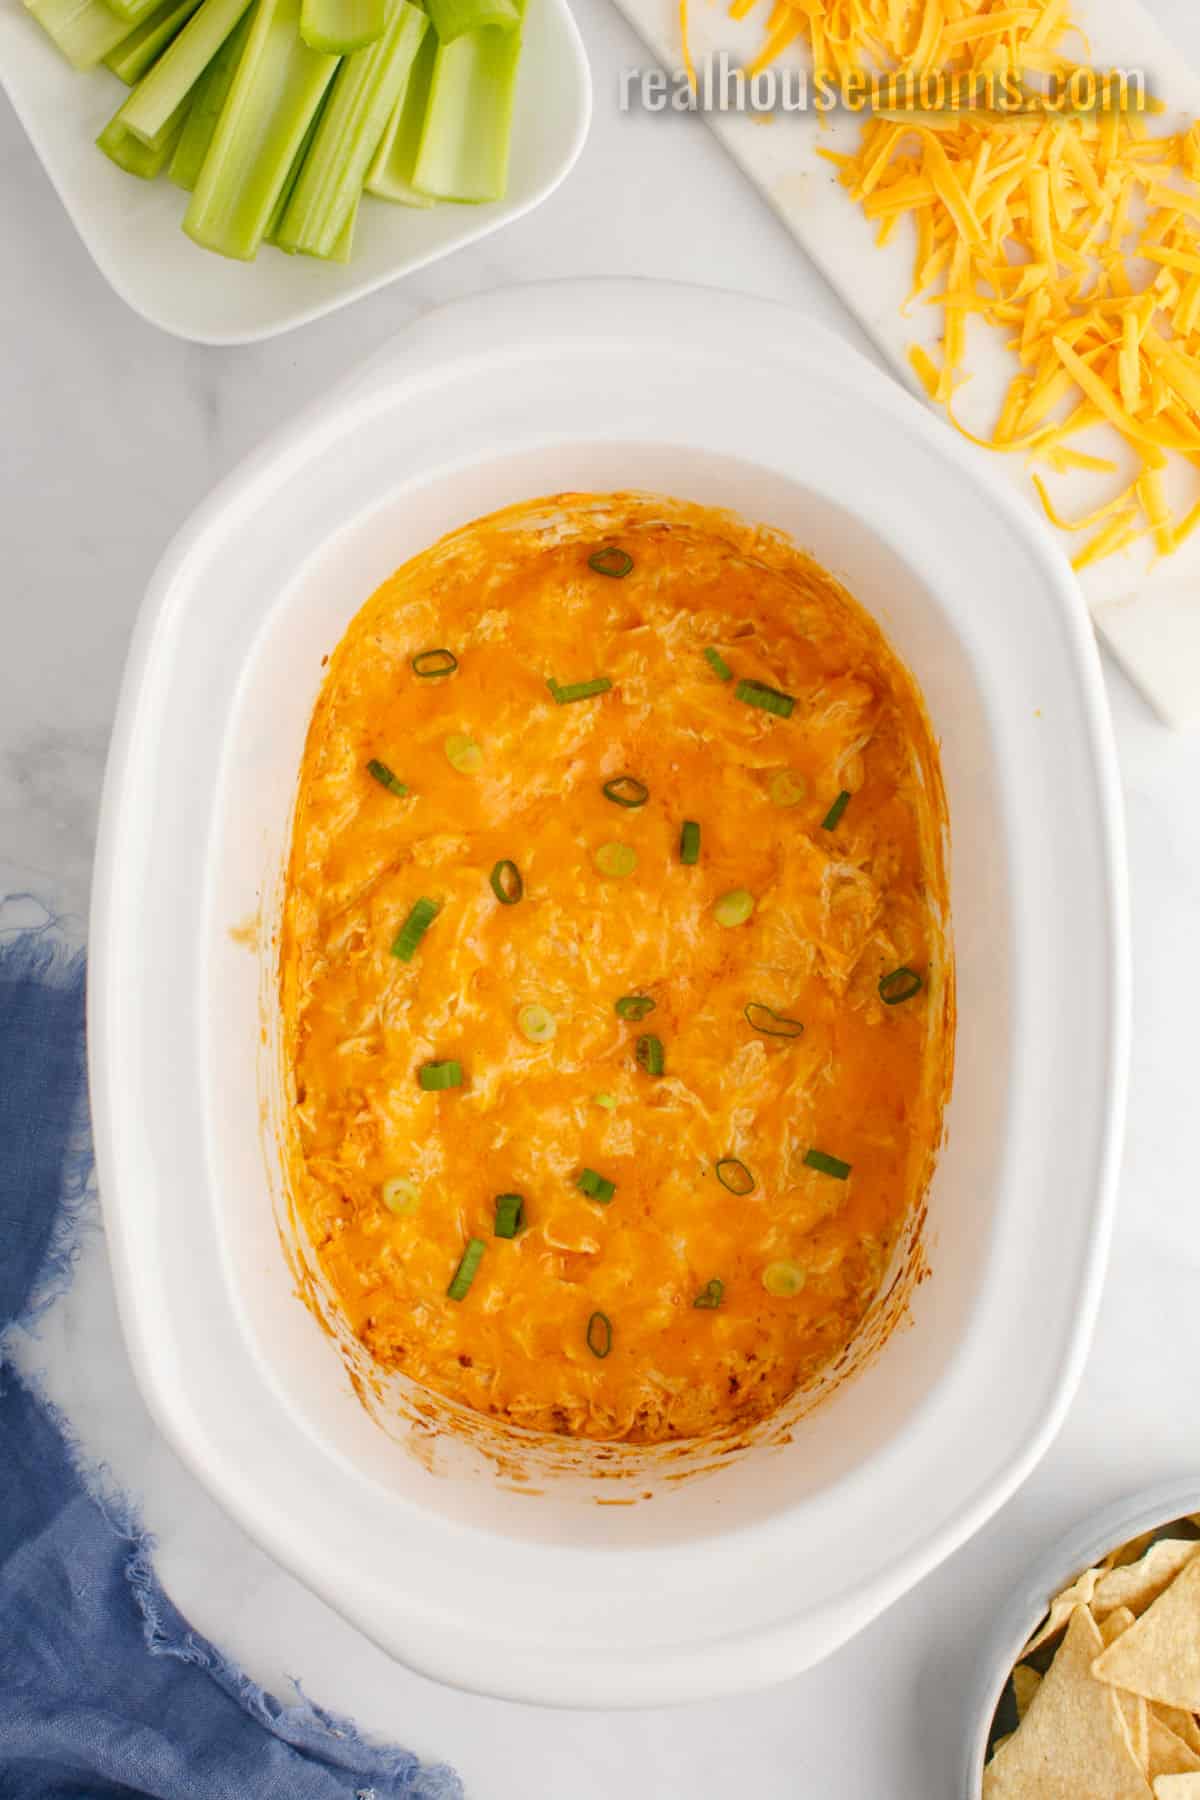 Spinach and Buffalo Chicken Double Dipper, When one group wants a spinach  dip and another wants a buffalo chicken dipwhy not have both? With the  Crock-Pot® Choose-A-Crock Programmable Slow